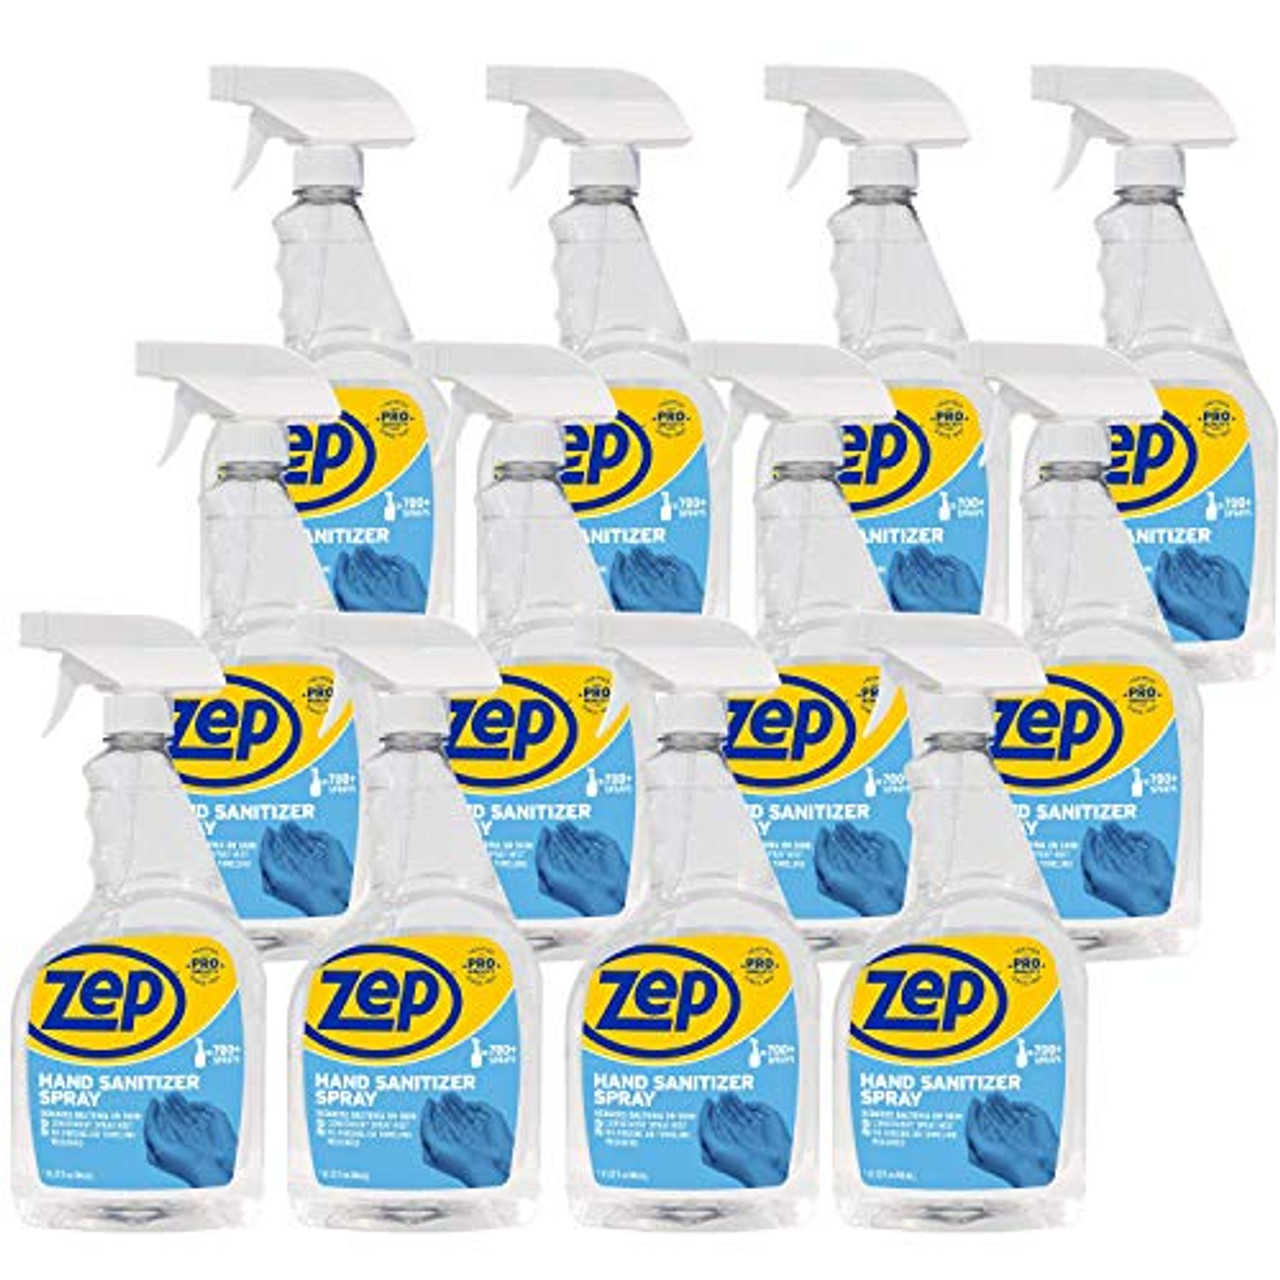 NEW! Zep Hand Sanitizer Spray Ready-to-use 32 oz. R46210 (Case of 12) Made  in USA - FDA and CDC Compliant - 66% alcohol